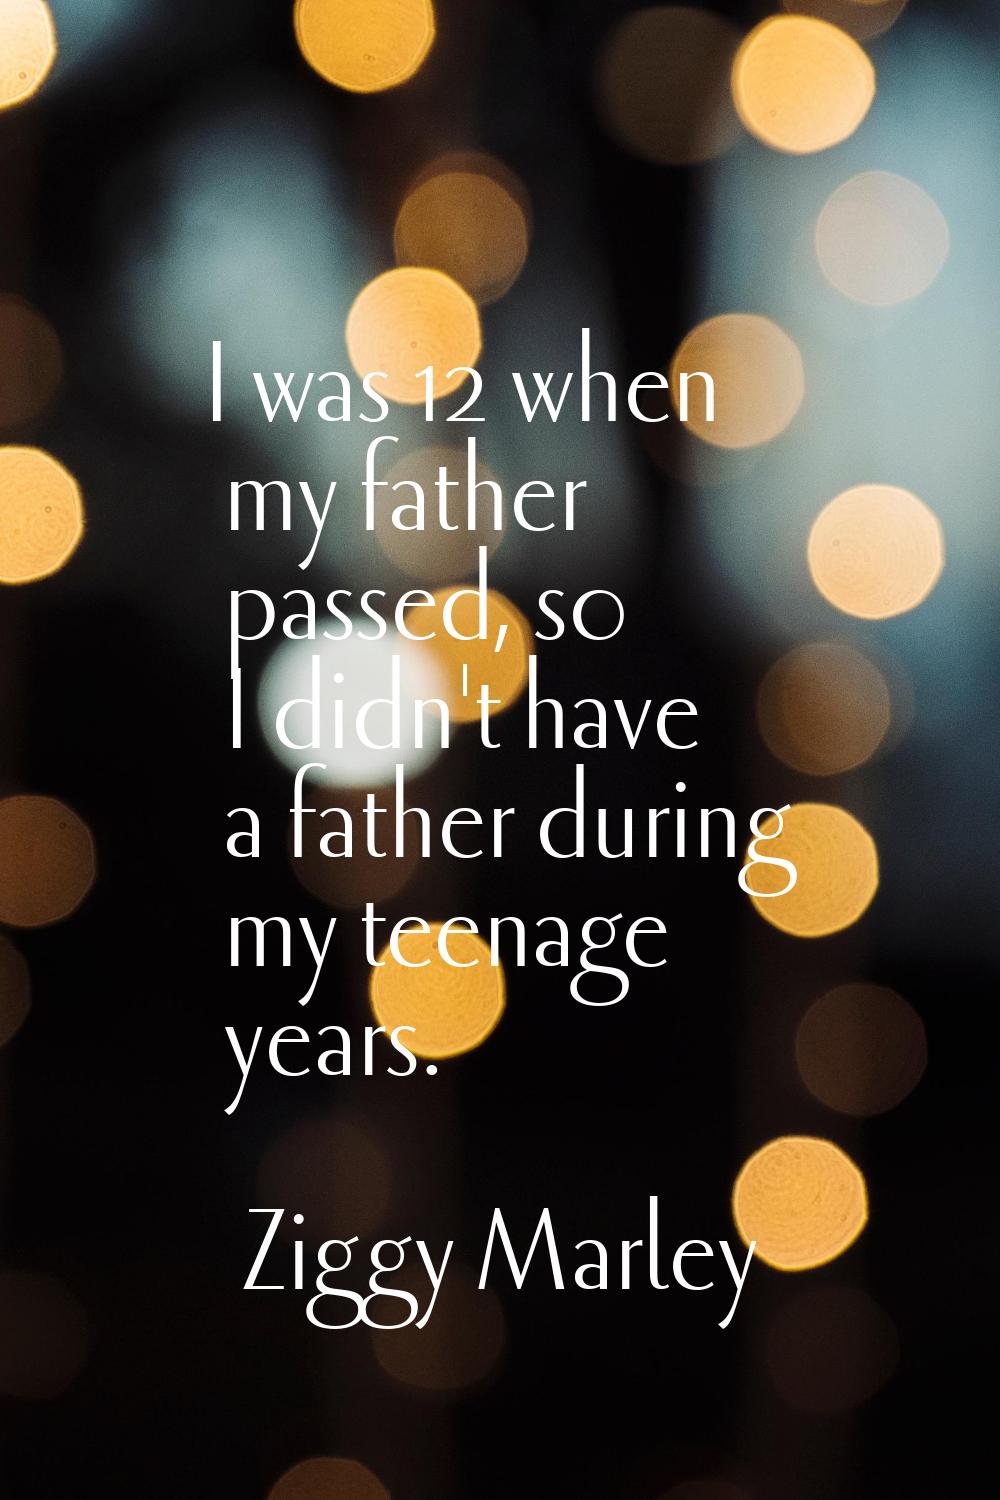 I was 12 when my father passed, so I didn't have a father during my teenage years.